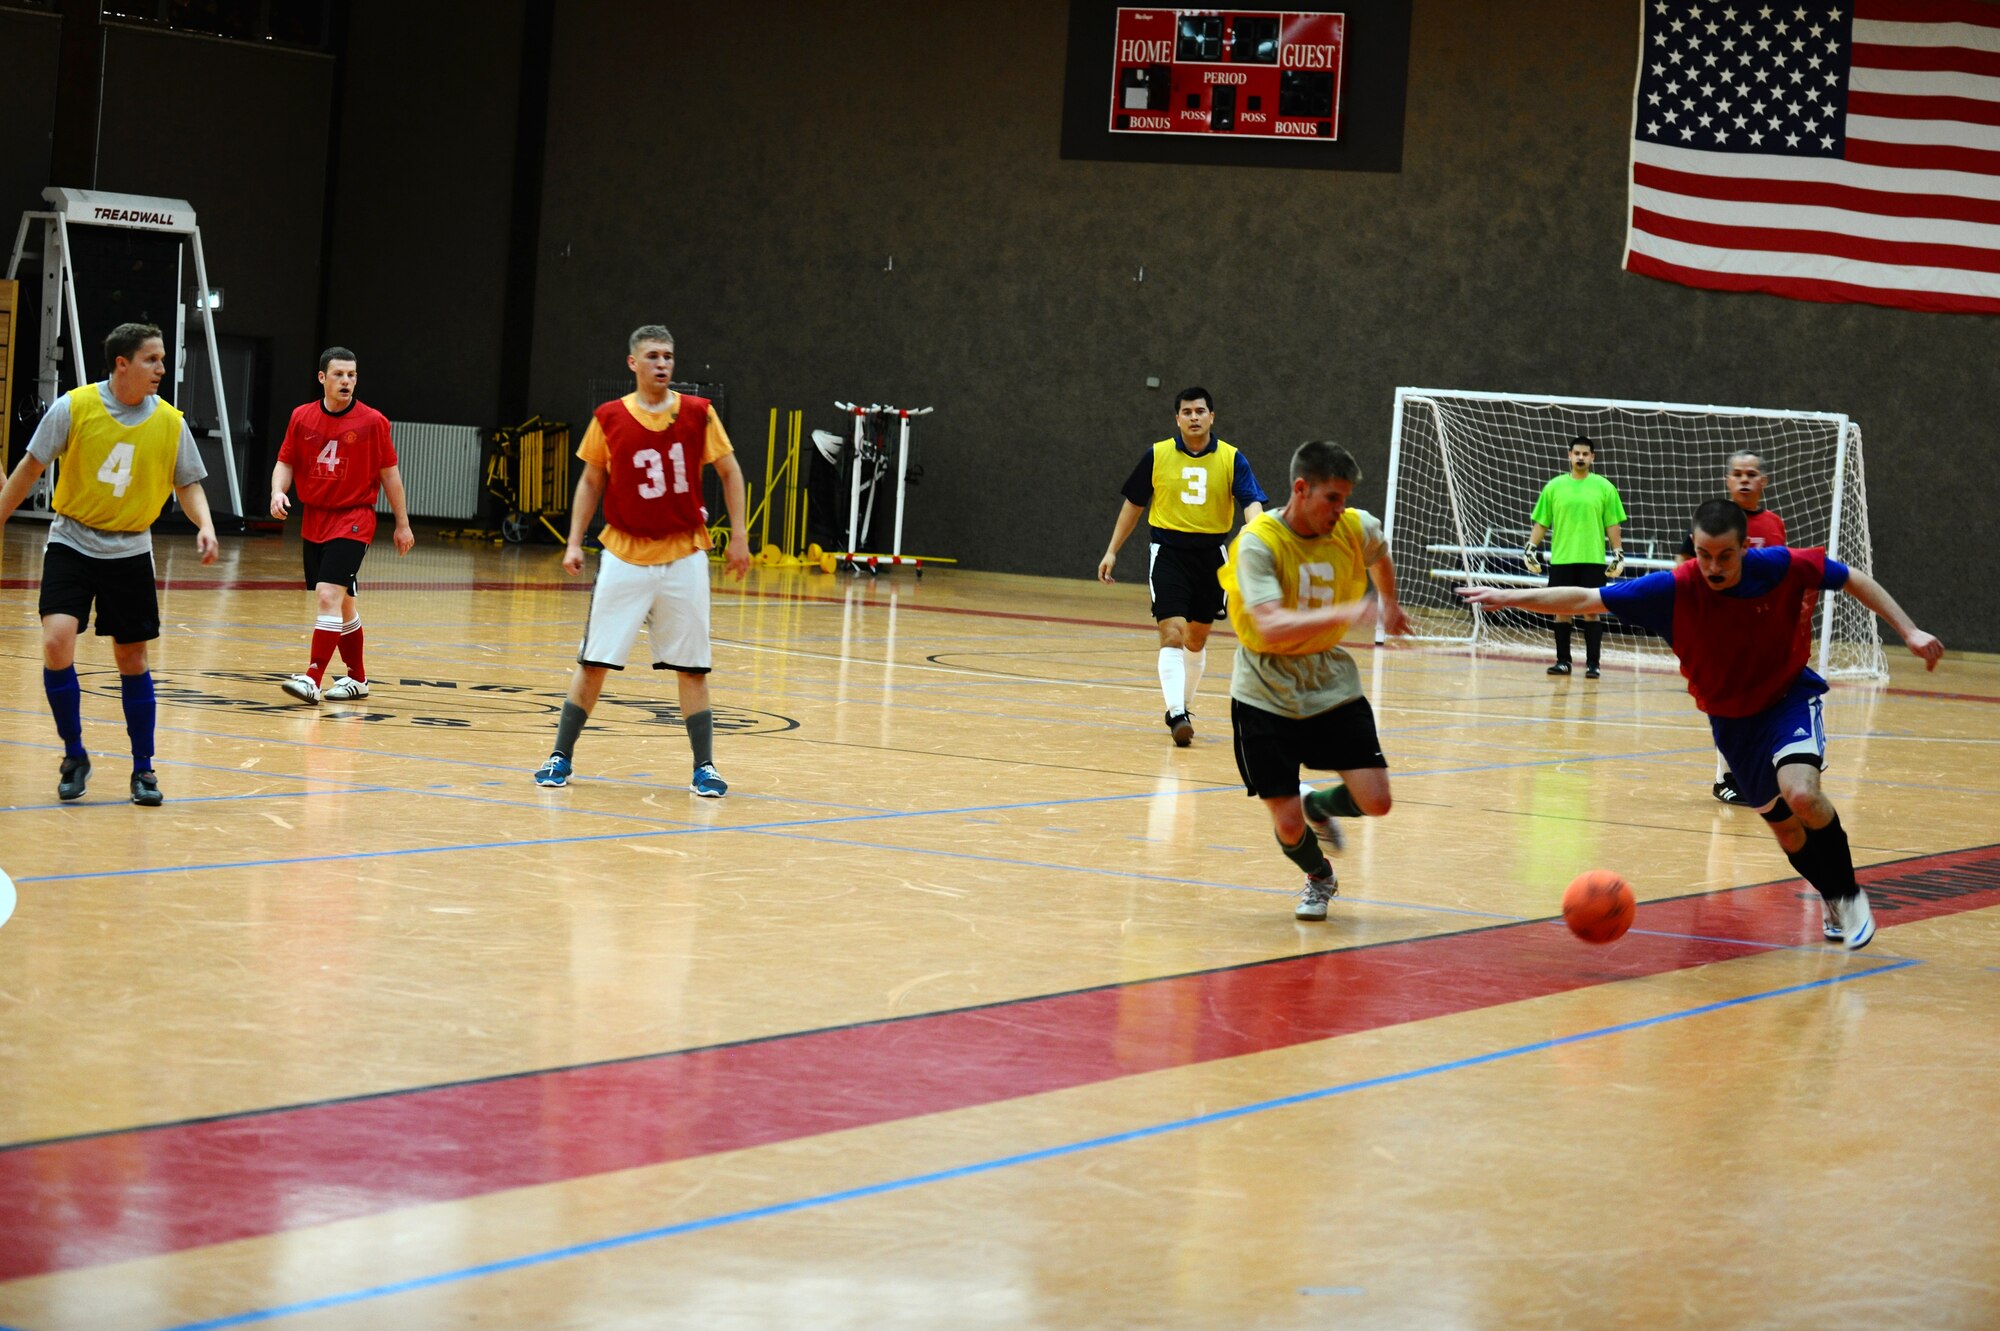 SPANGDAHLEM AIR BASE, Germany – Carl Miller, right, 52nd Force Support Squadron, tries to get past defender Mike Krestyn, 81st Fighter Squadron, during the indoor soccer championship at the Skelton Memorial Fitness Center here June 12. The 52nd FSS defeated the 81st FS in the first game 7-6. The 81st FS won the double-elimination championship after winning the second game 9-5. (U.S. Air Force photo by Airman 1st Class Matthew B. Fredericks/Released)